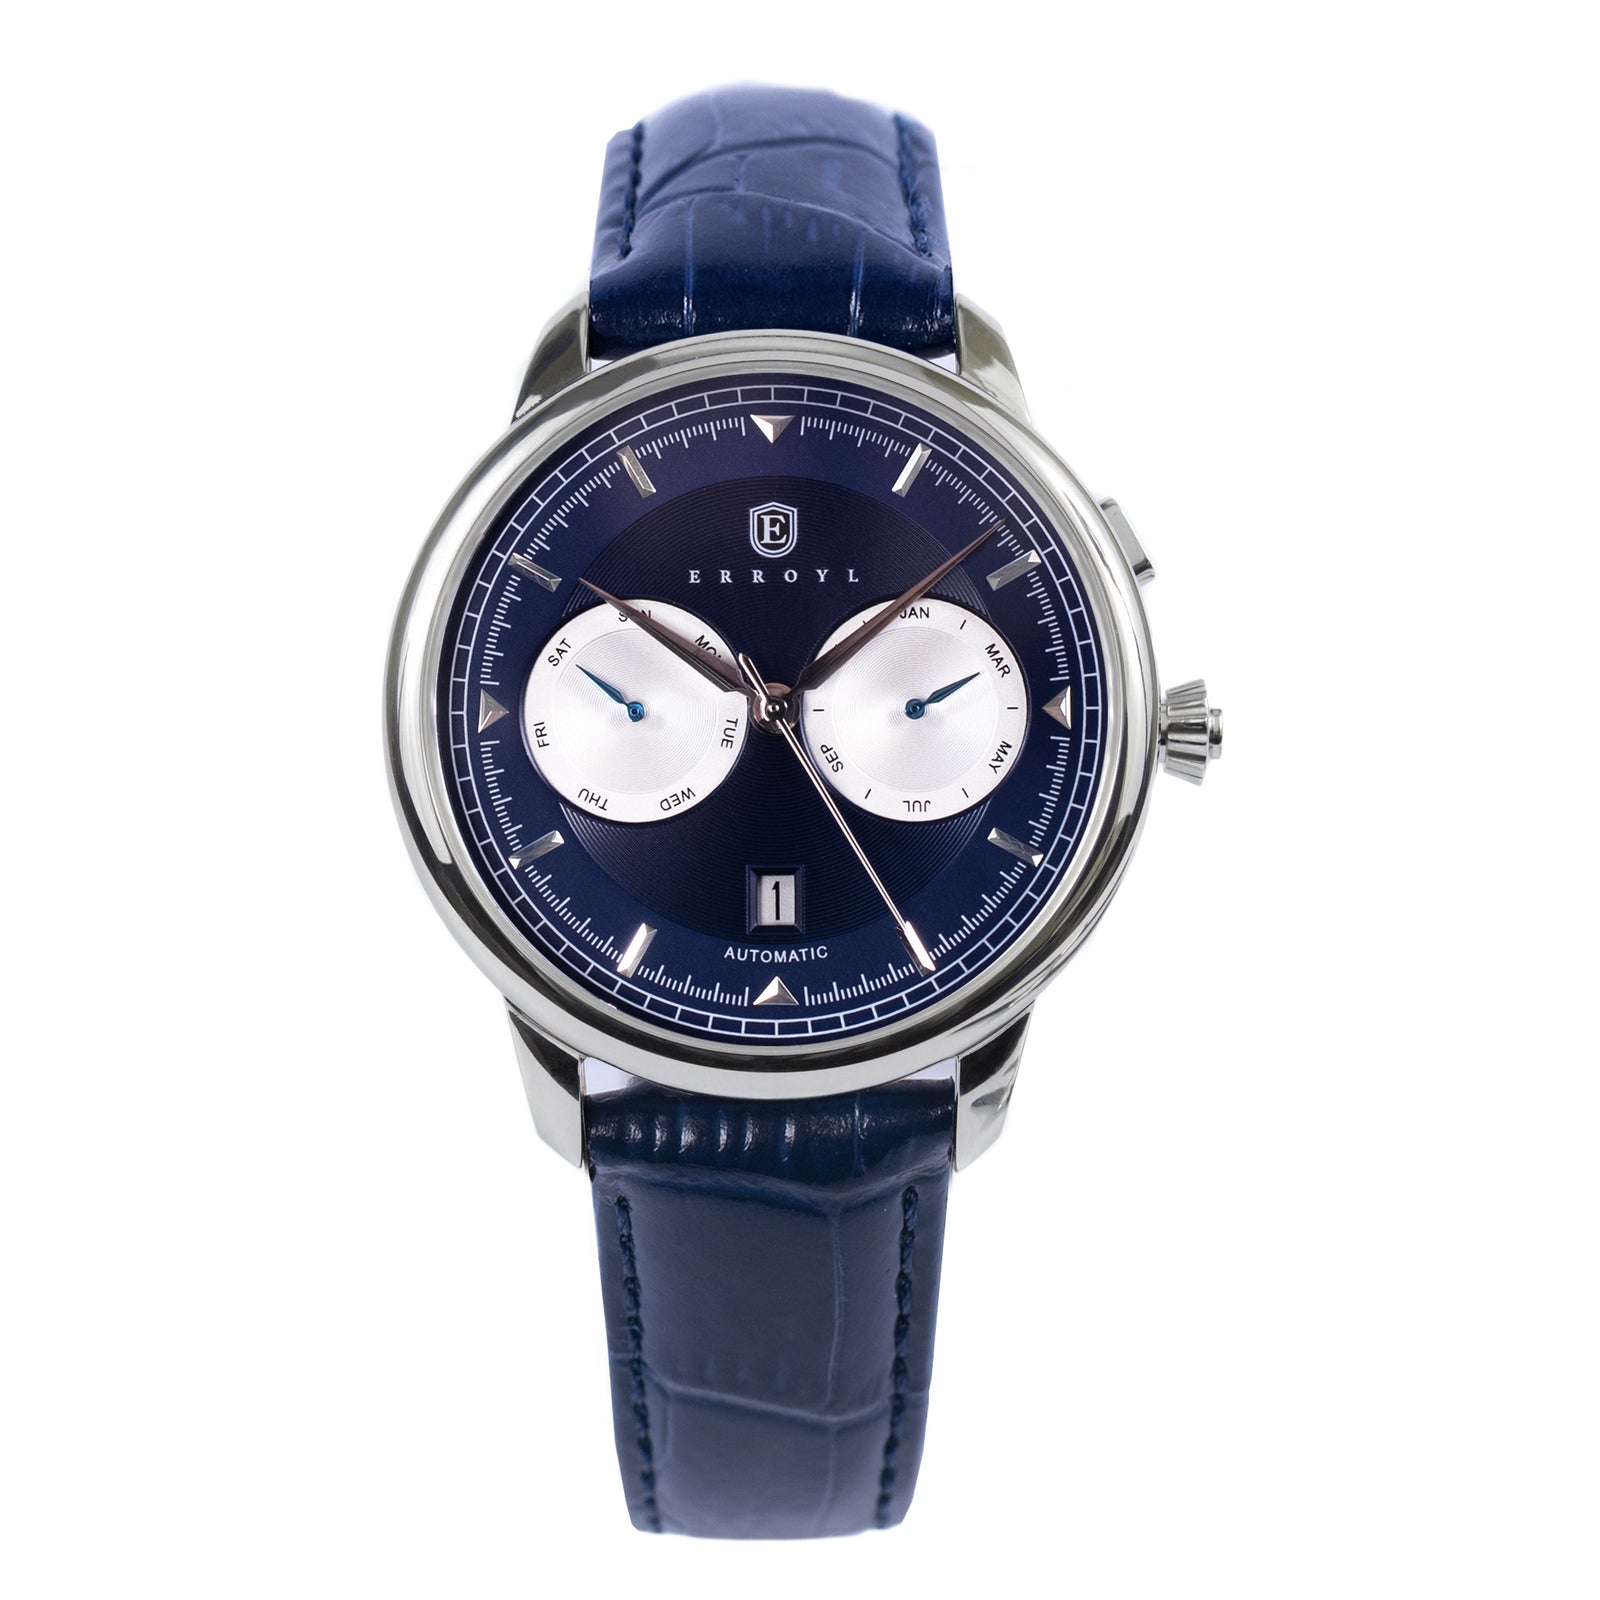 ERROYL the For Mechanical Watches Collection Regent Men, -